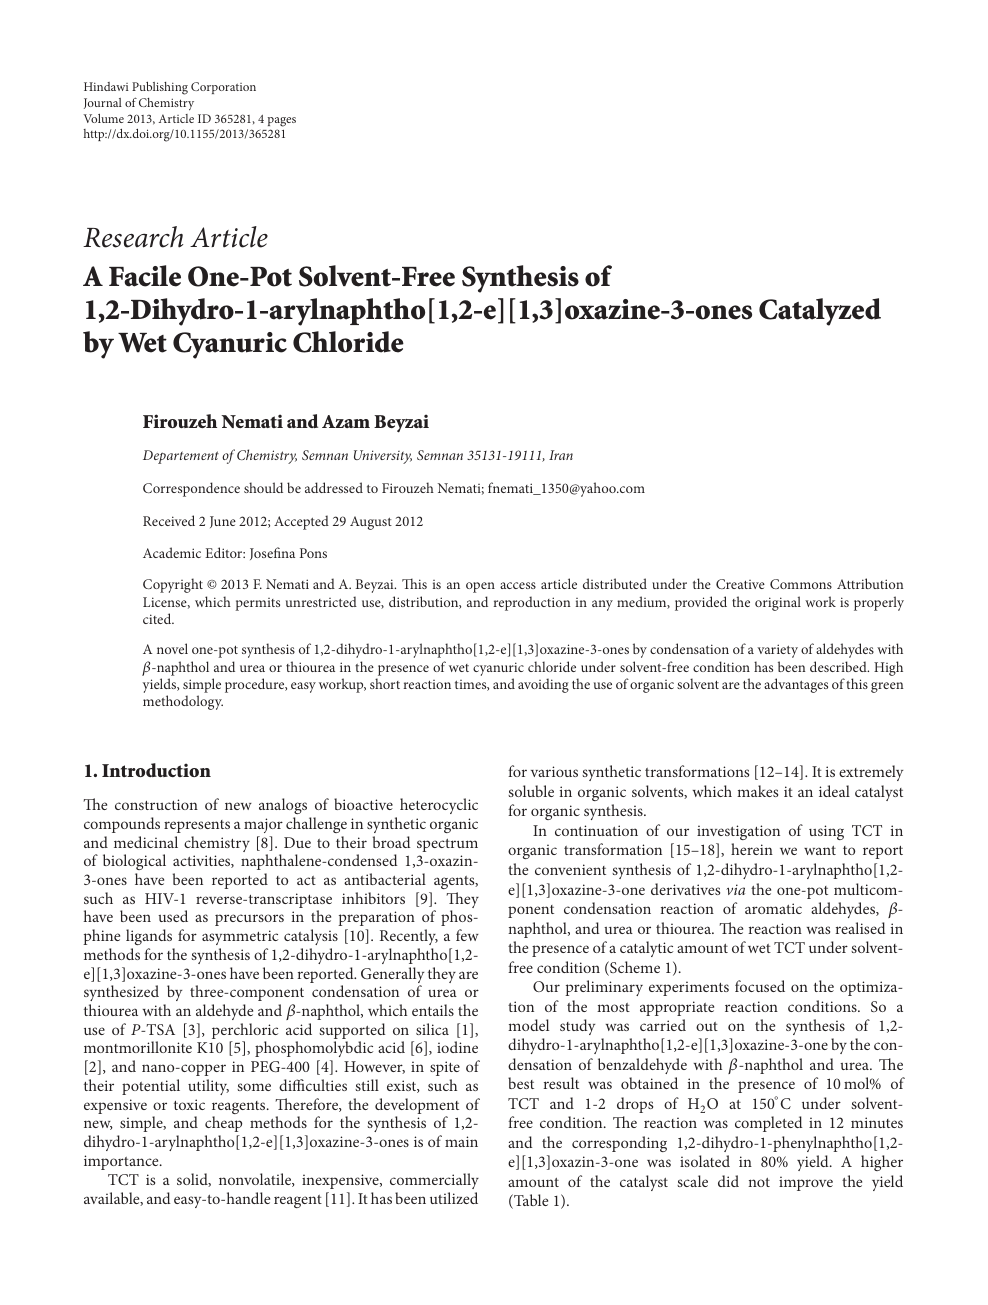 A Facile One Pot Solvent Free Synthesis Of 1 2 Dihydro 1 Arylnaphtho 1 2 E 1 3 Oxazine 3 Ones Catalyzed By Wet Cyanuric Chloride Topic Of Research Paper In Chemical Sciences Download Scholarly Article Pdf And Read For Free On Cyberleninka Open Science